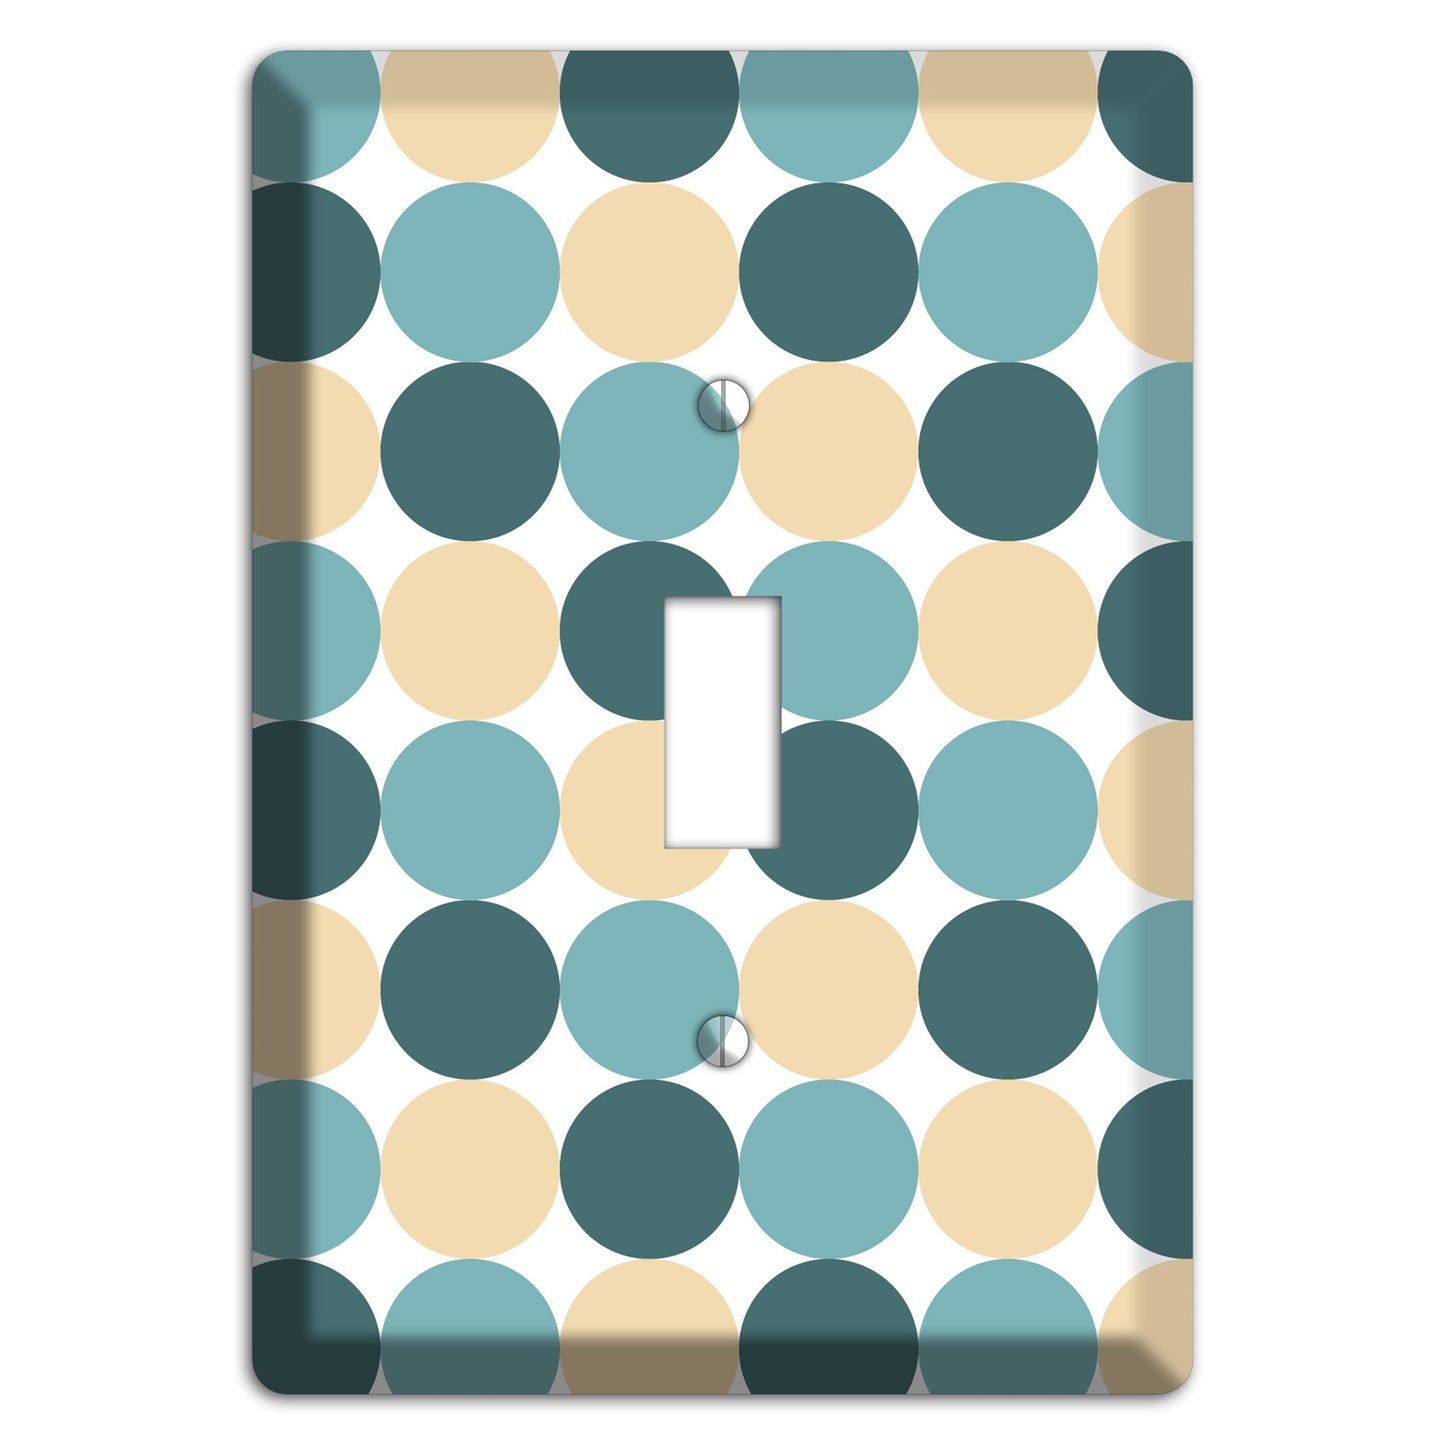 Dusty Blue Beige Tiled Dots Cover Plates